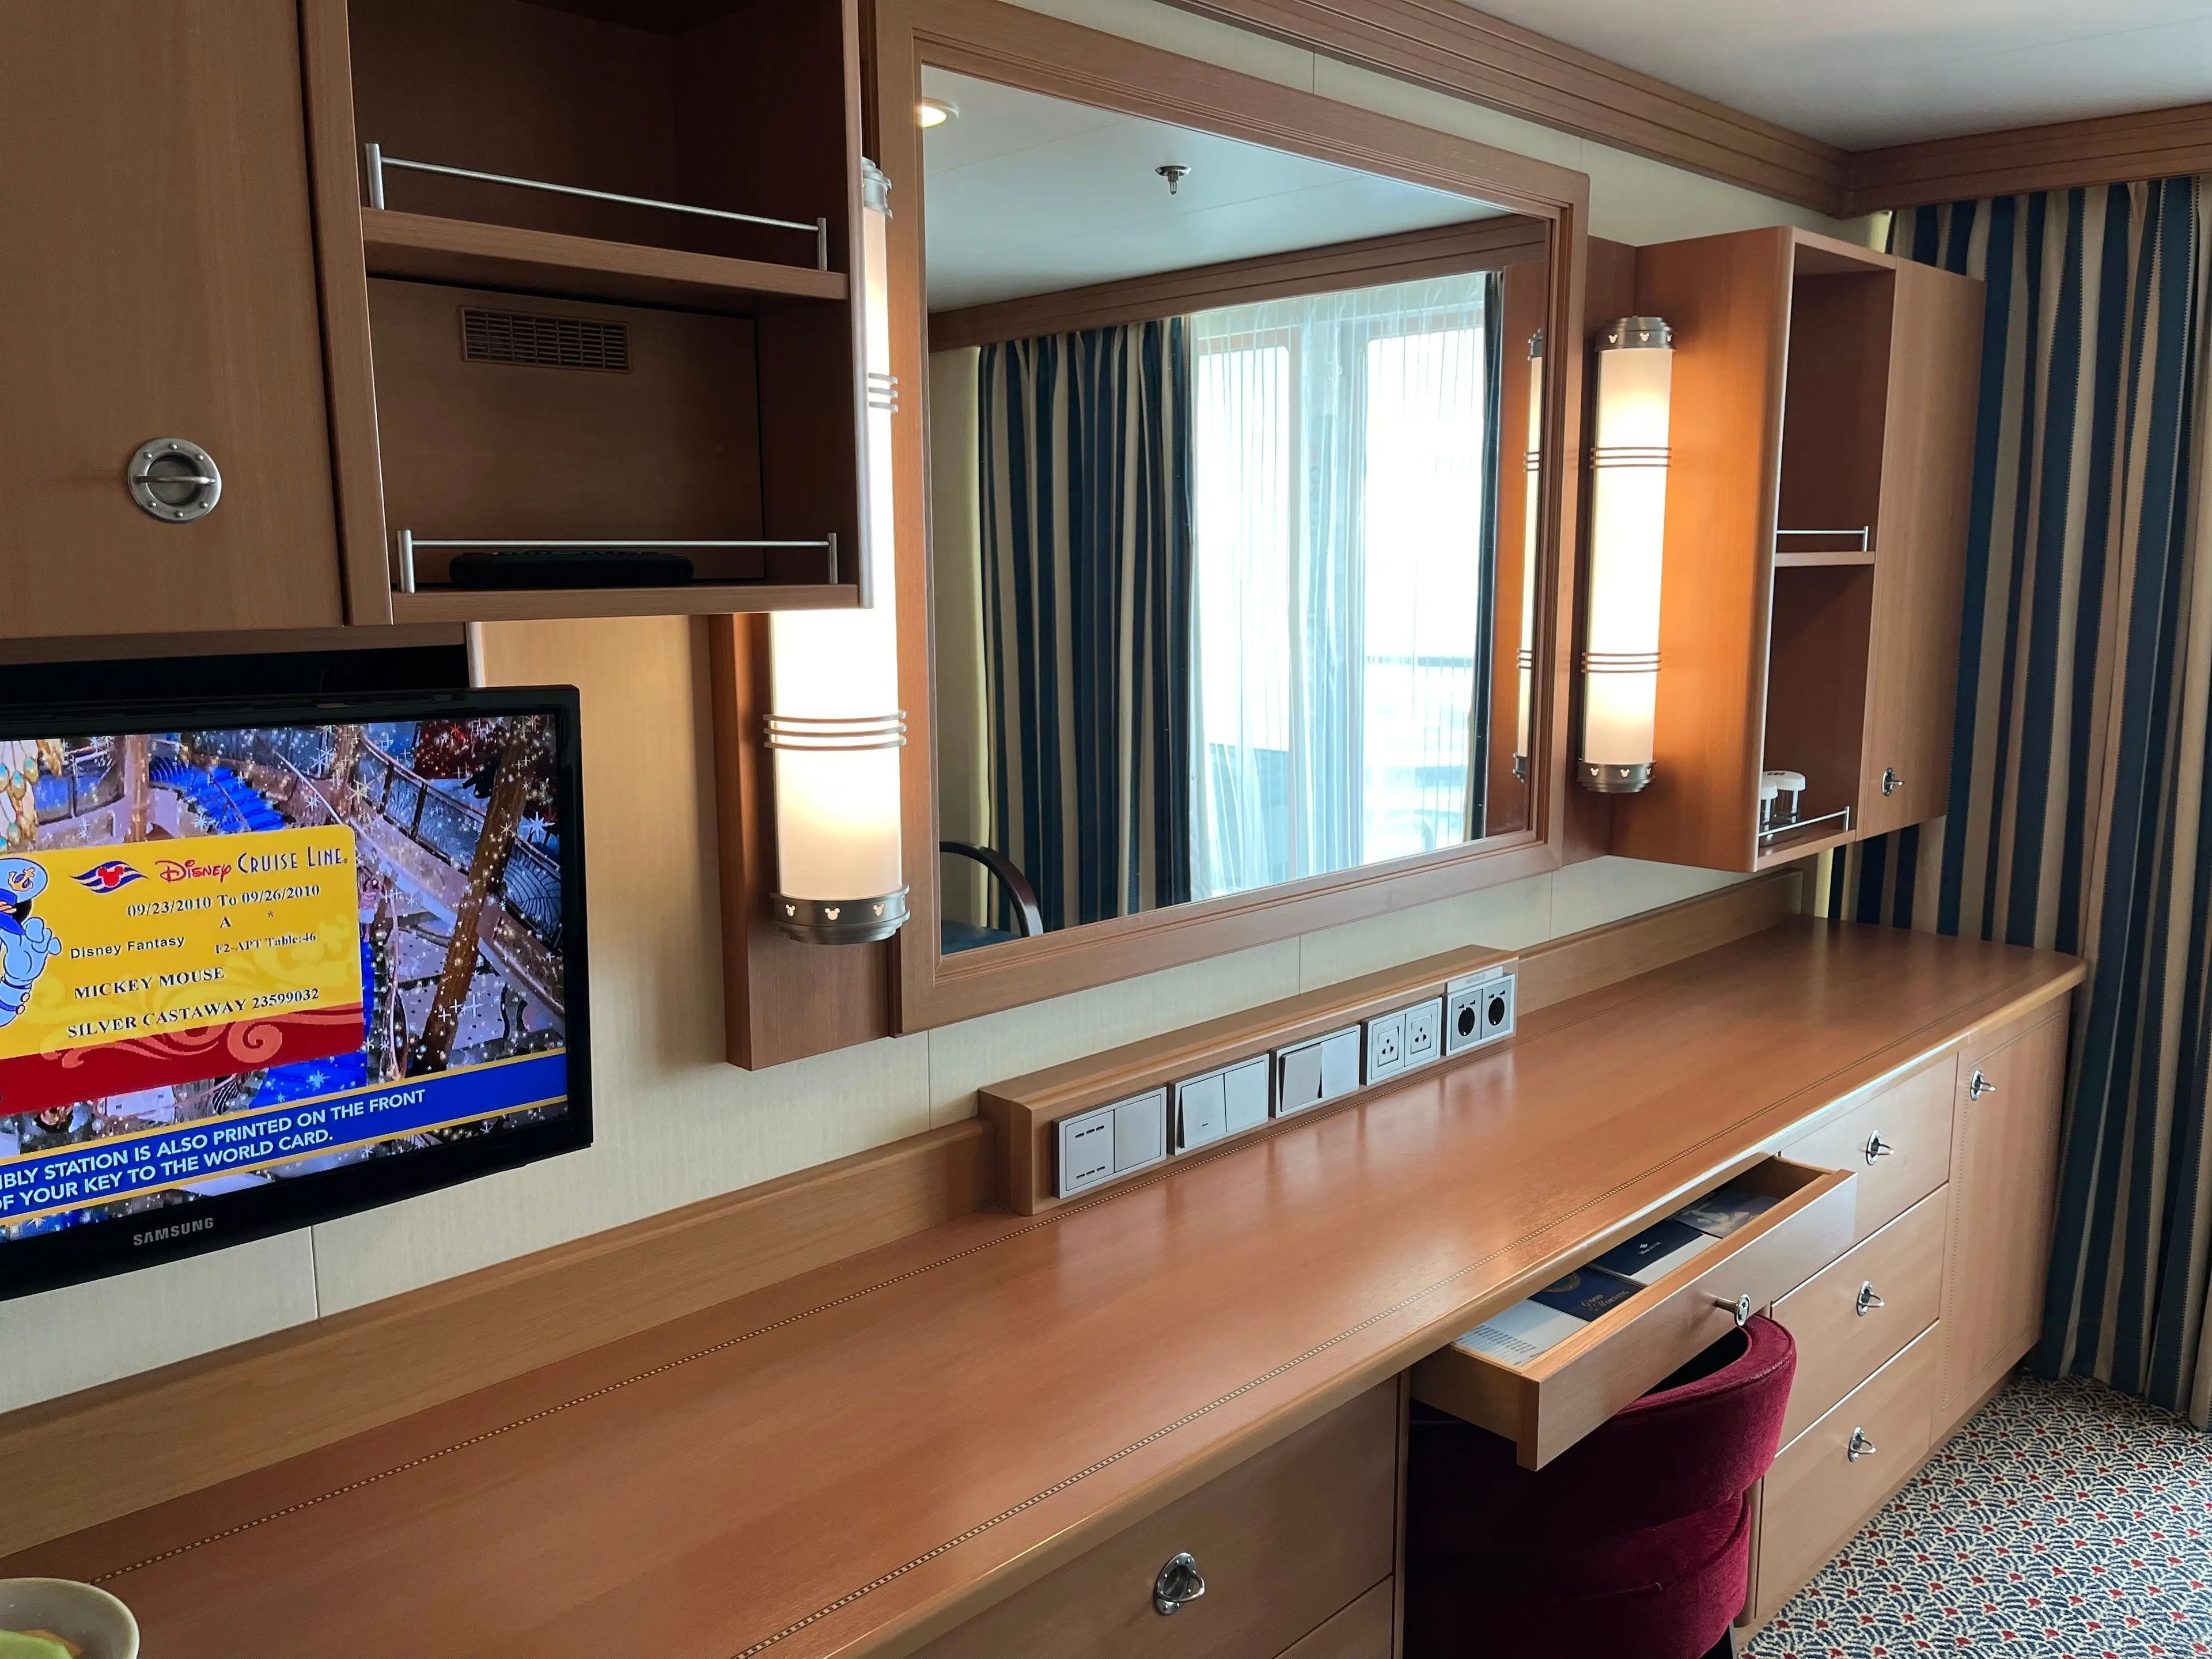 tv and storage area in the living room of a family stateroom on a disney cruise